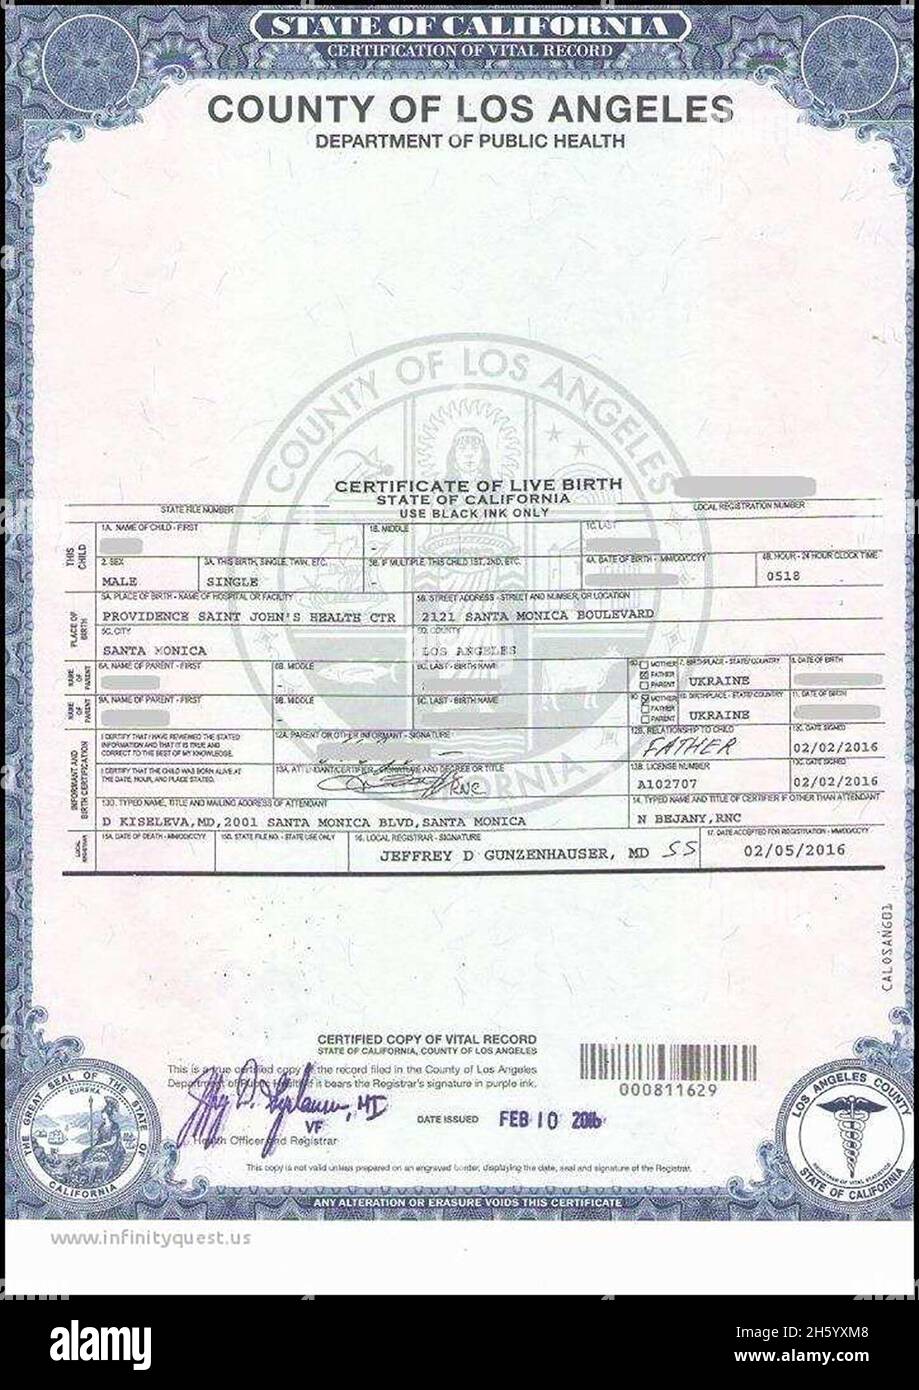 A specimen of the birth certificate from Los Angeles County California